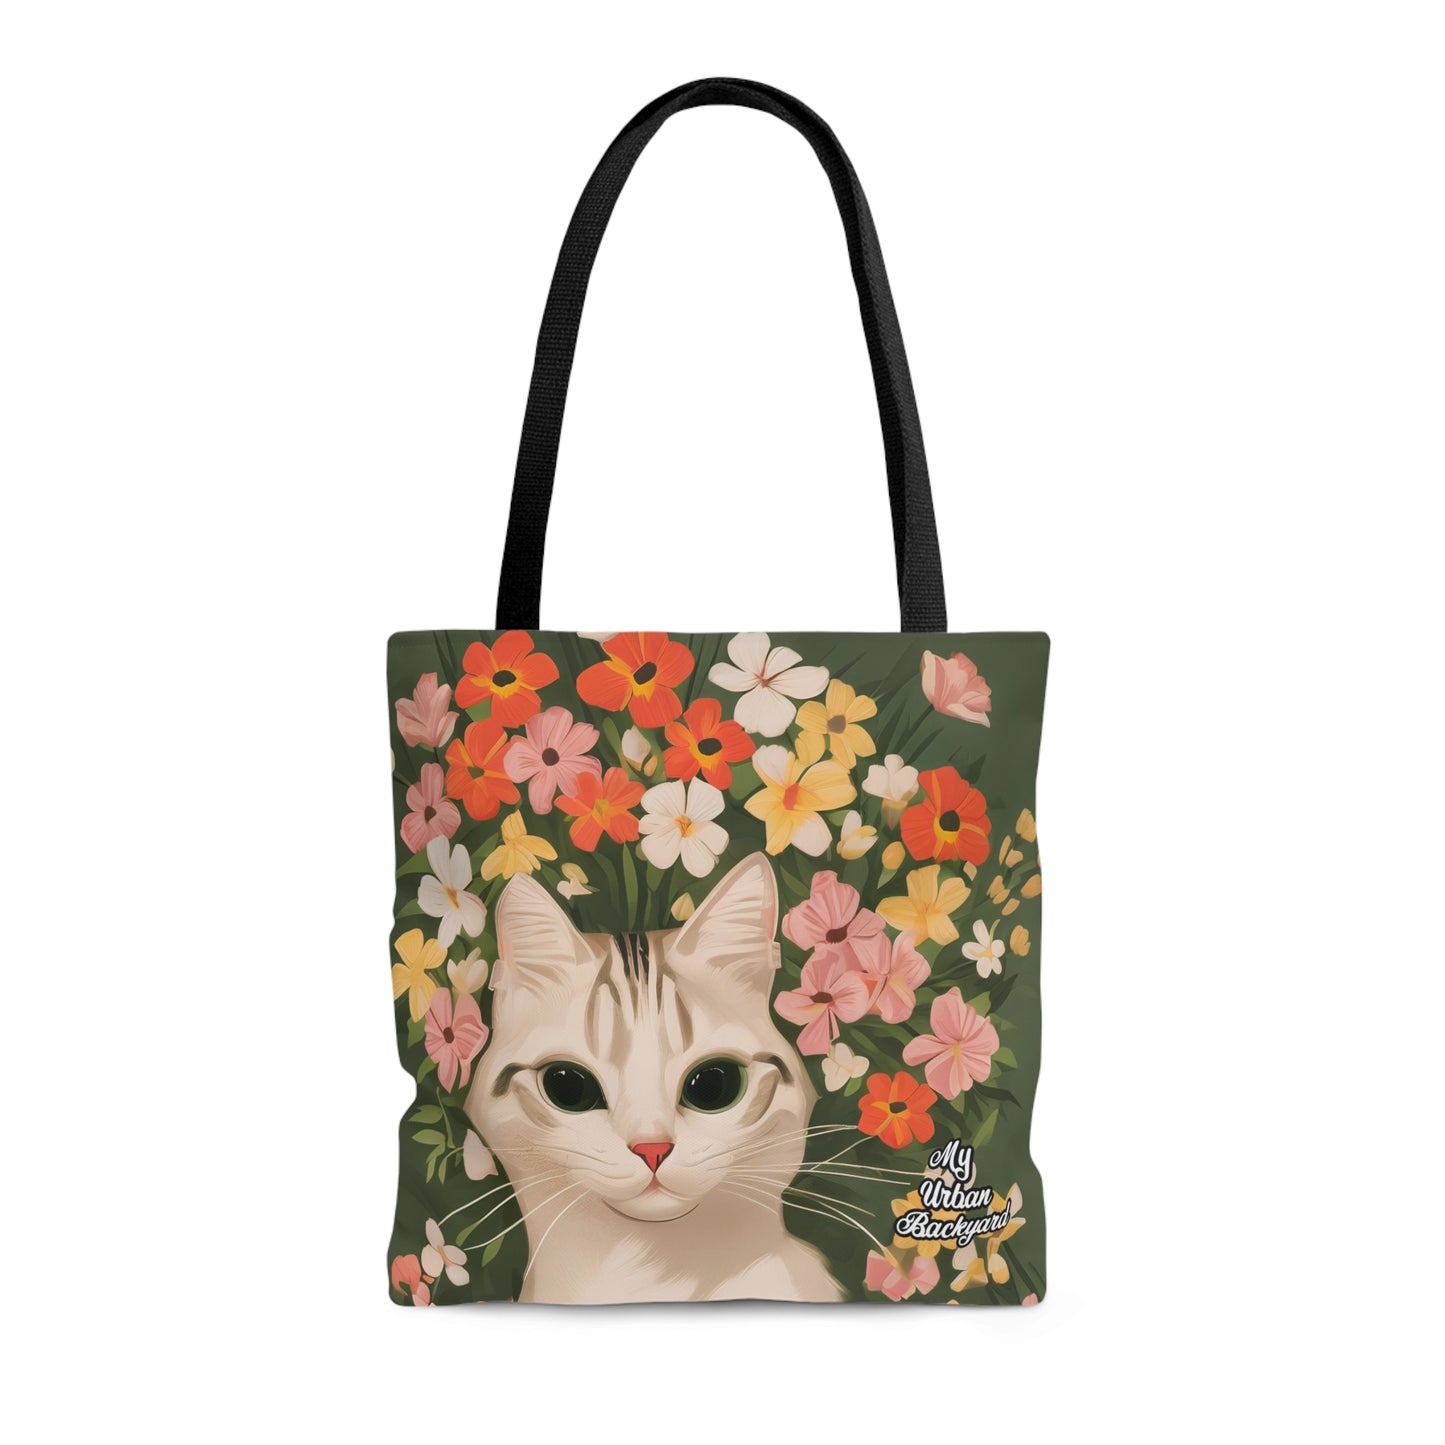 White Cat with Flowers, Tote Bag for Everyday Use - Durable and Functional